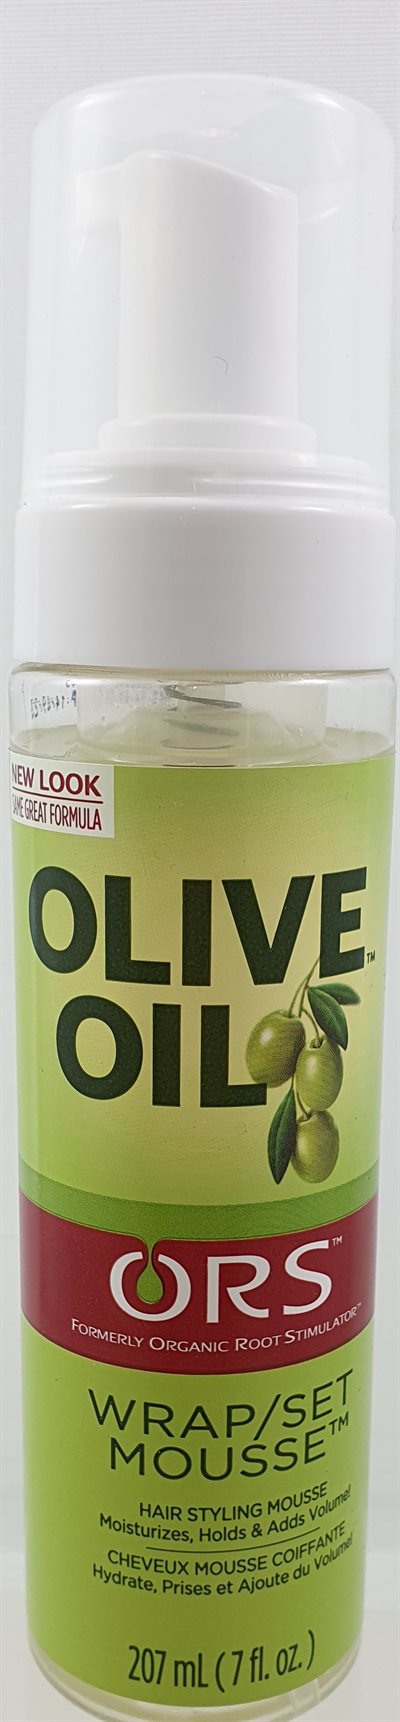 ORS. olive oil wrap/set mousse for hair 207ml.